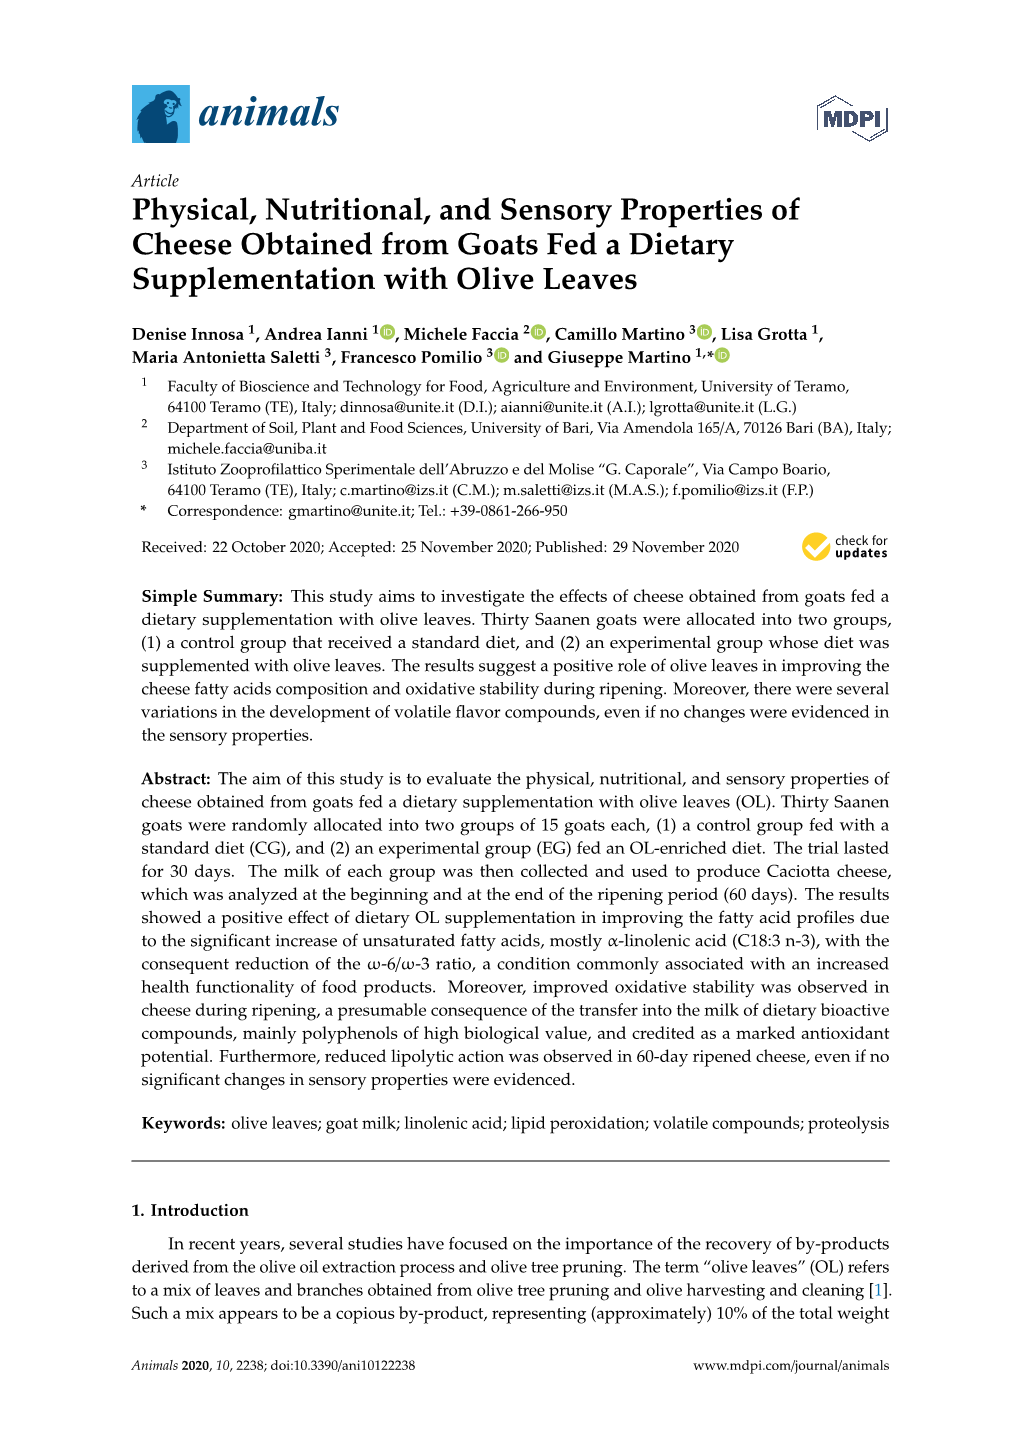 Physical, Nutritional, and Sensory Properties of Cheese Obtained from Goats Fed a Dietary Supplementation with Olive Leaves